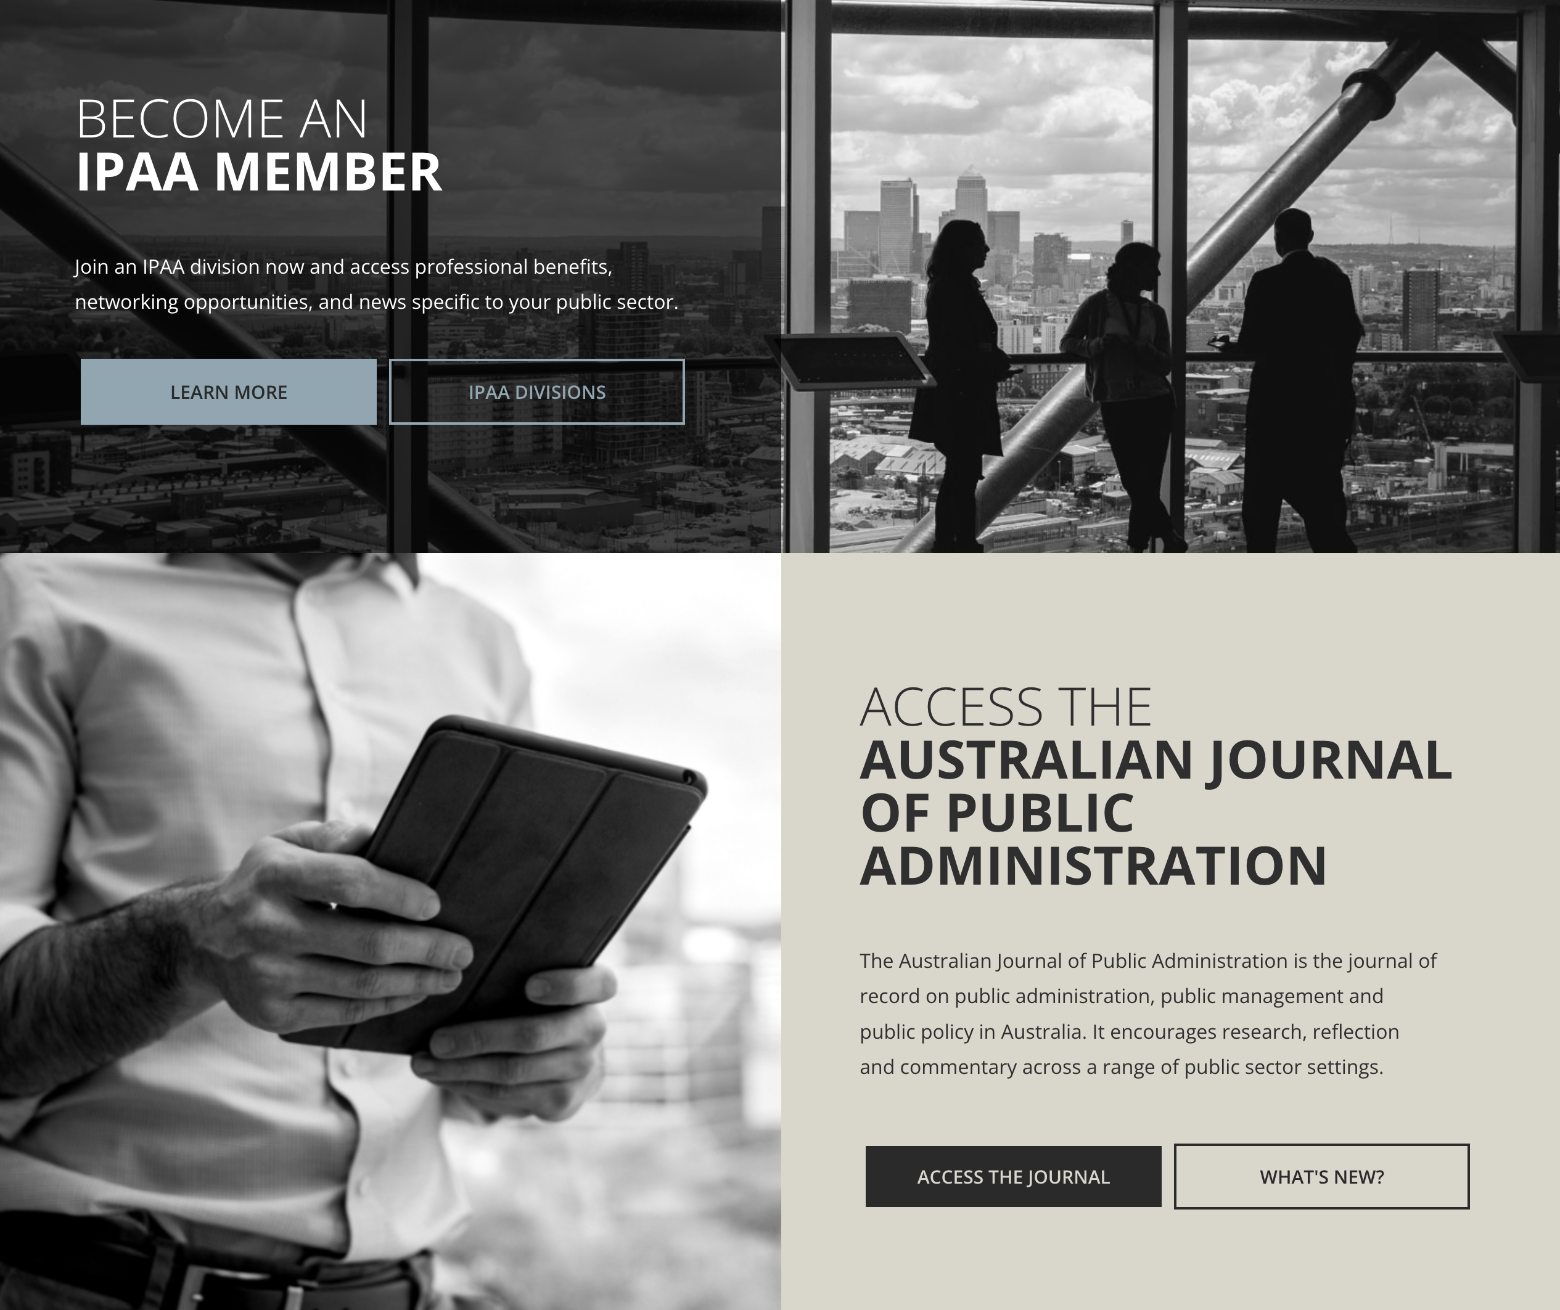 IPAA’s website shows striking black-and-white photographs contrasting with but not competing with the background colors of the text boxes beside them. The bottom section invites visitors to subscribe to the IPAA’s journal, and is paired with a photo of a man holding a tablet or an e-reader.